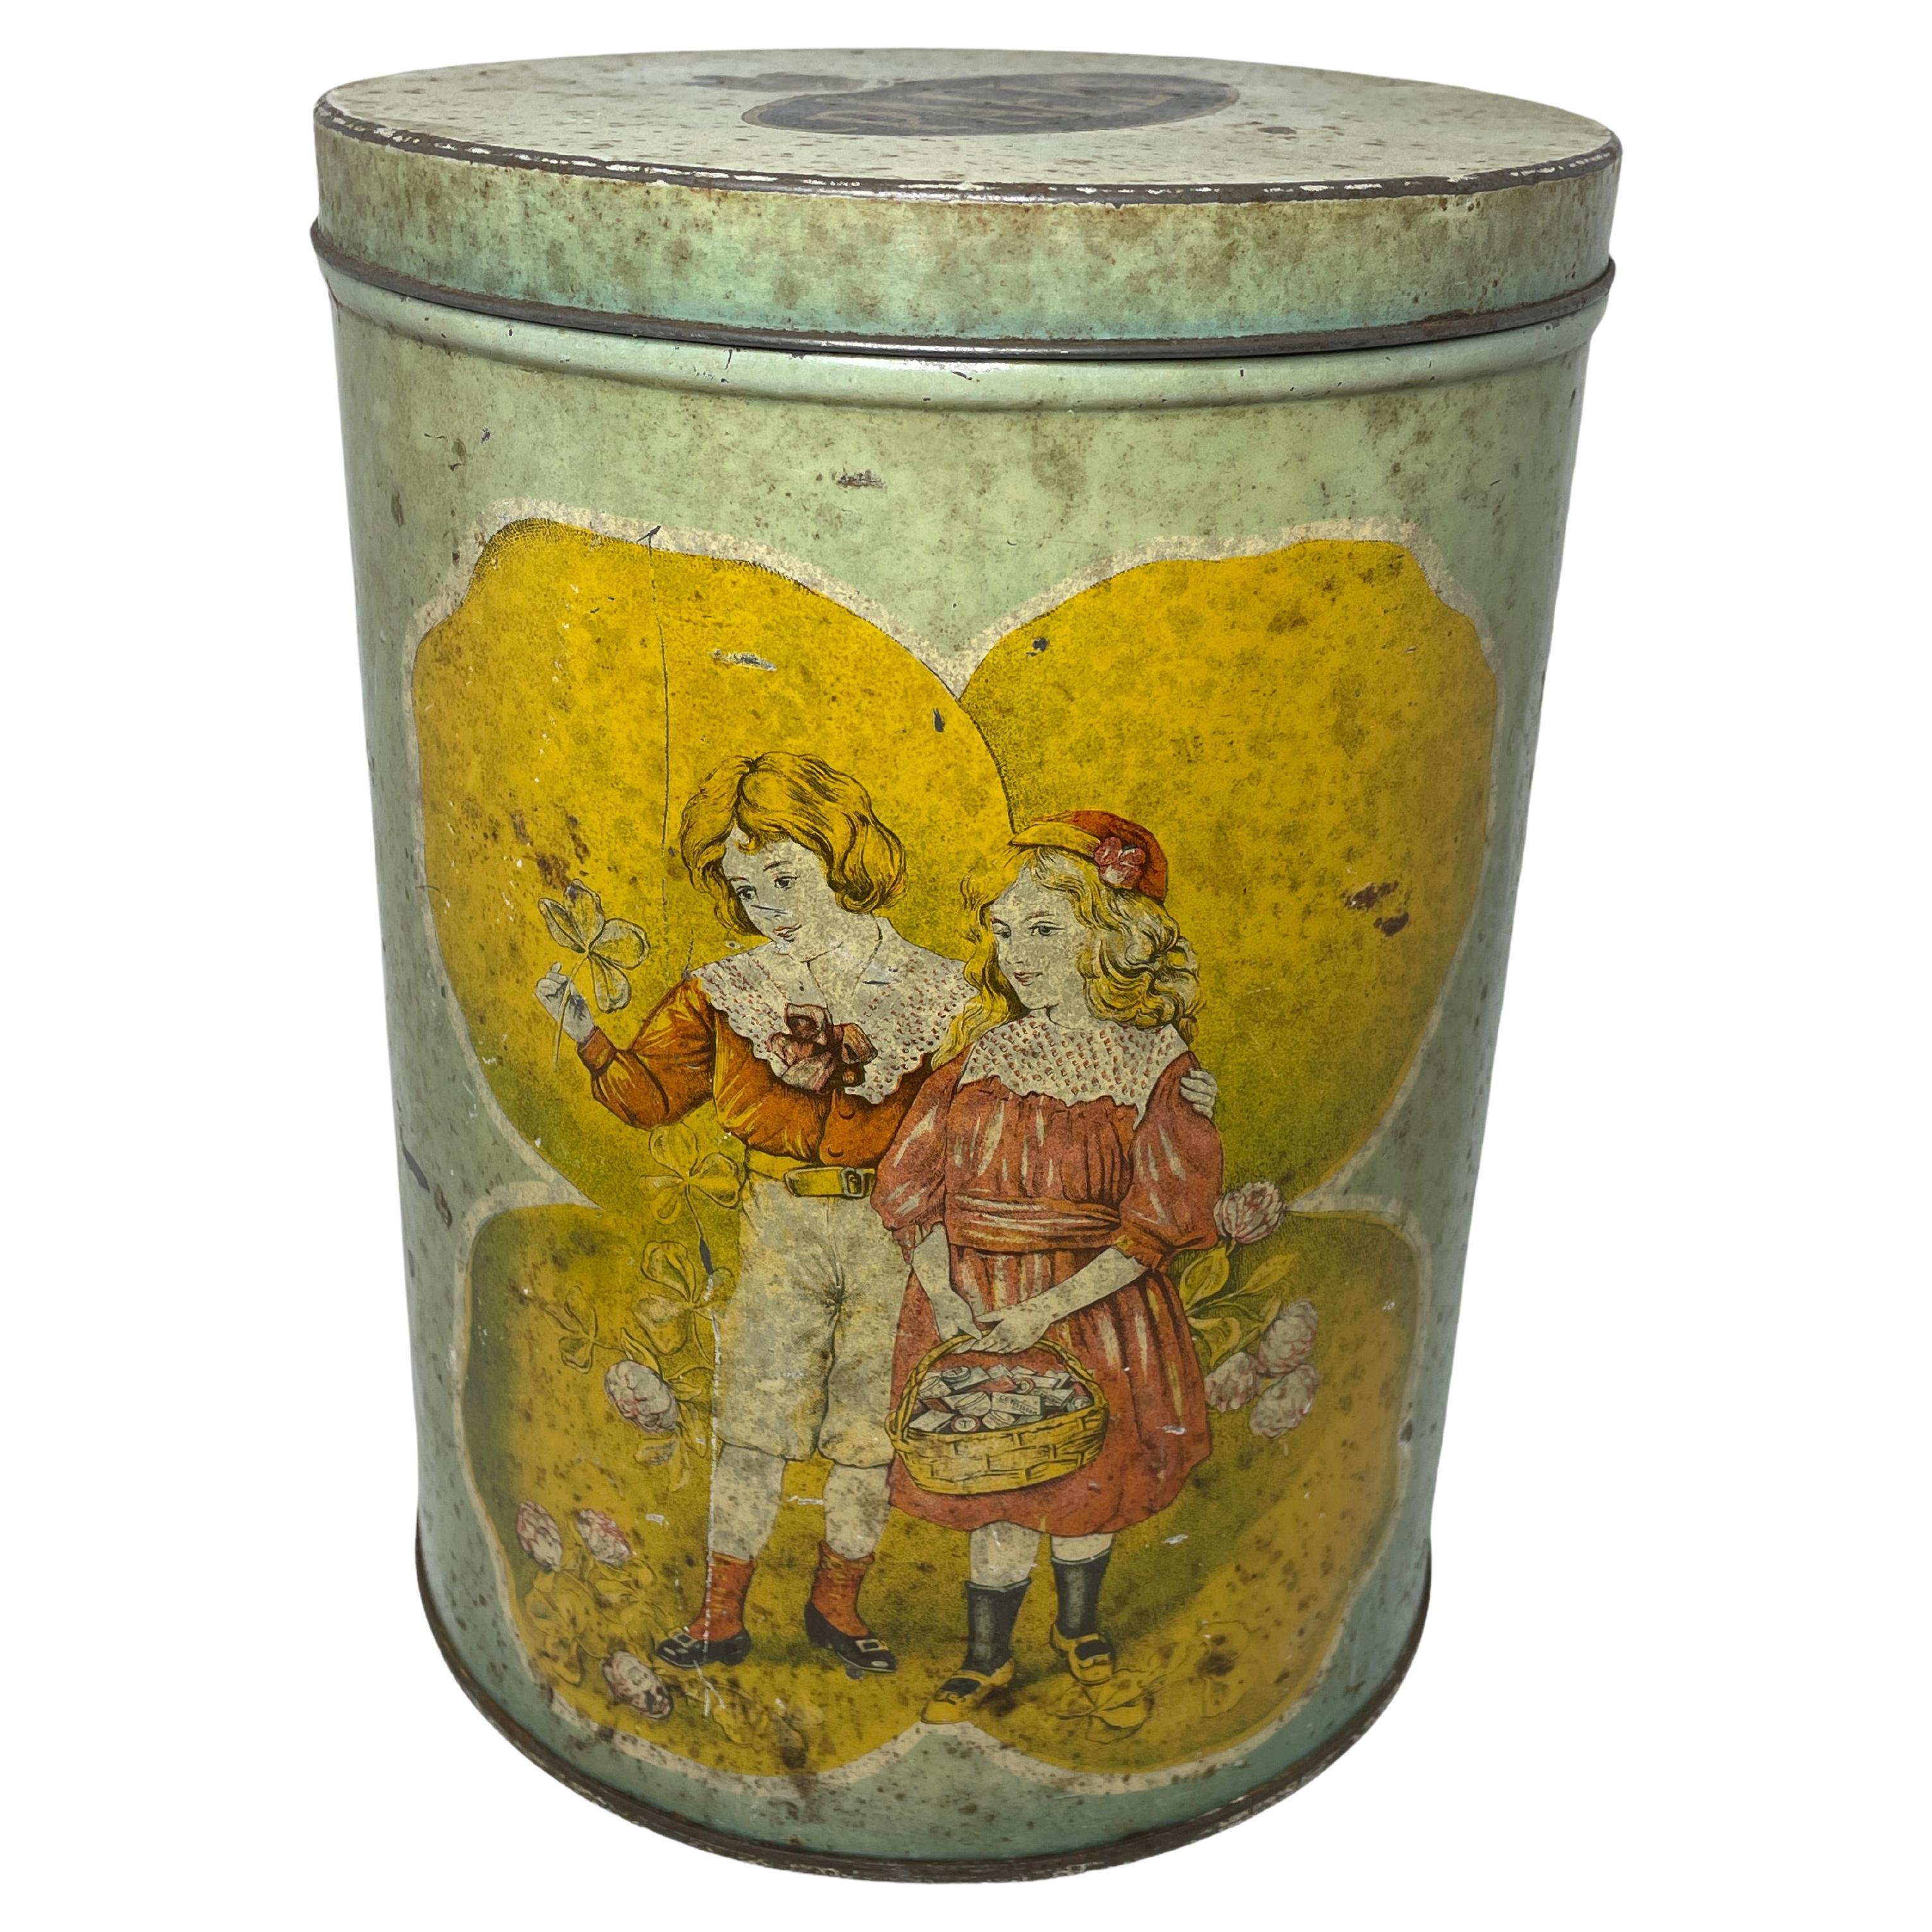 Beautiful Lithographed Candy Cookie Tin Box Advertising Vintage Sweden, 1910s